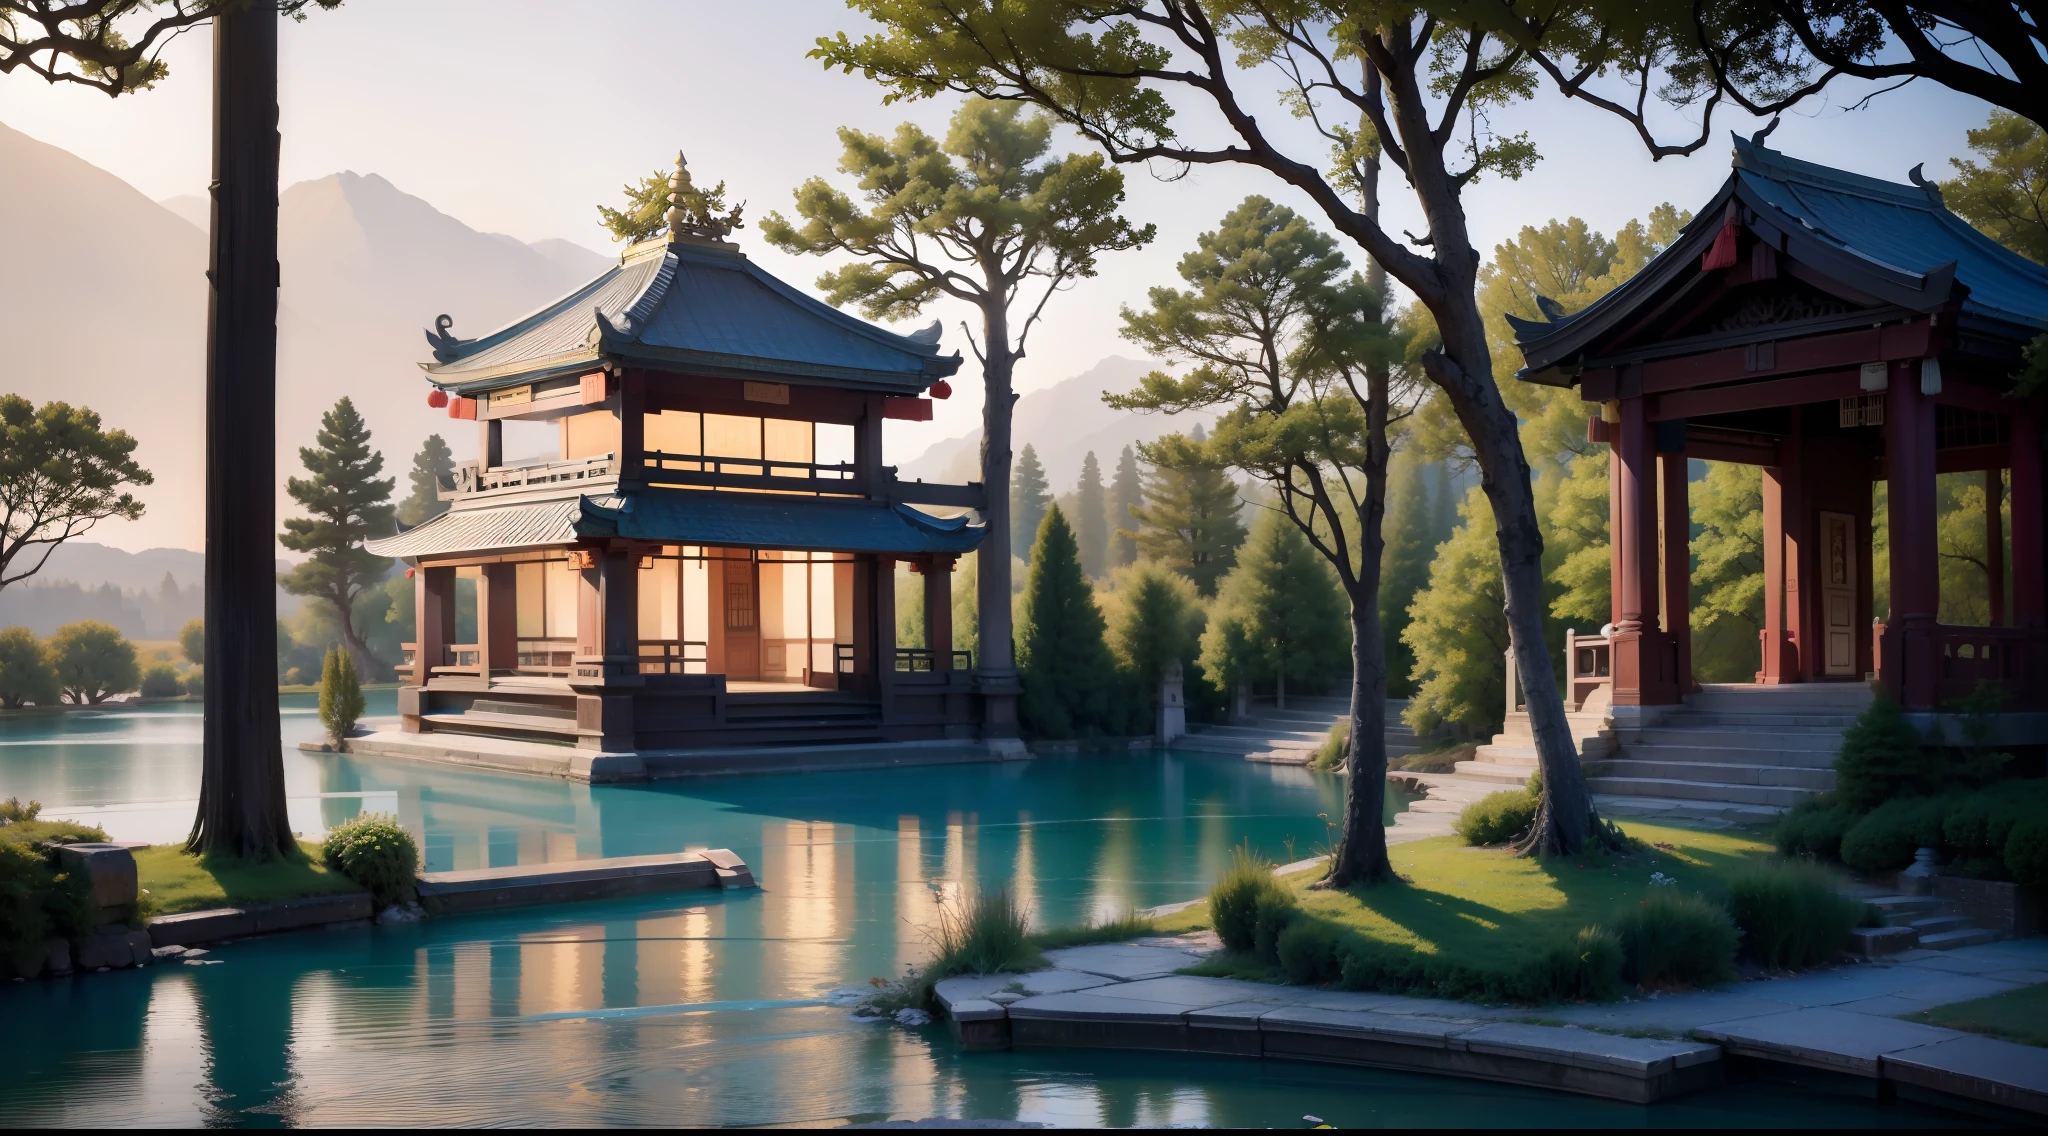 lake，mont，pavilion，the ancients，The tree，China-style